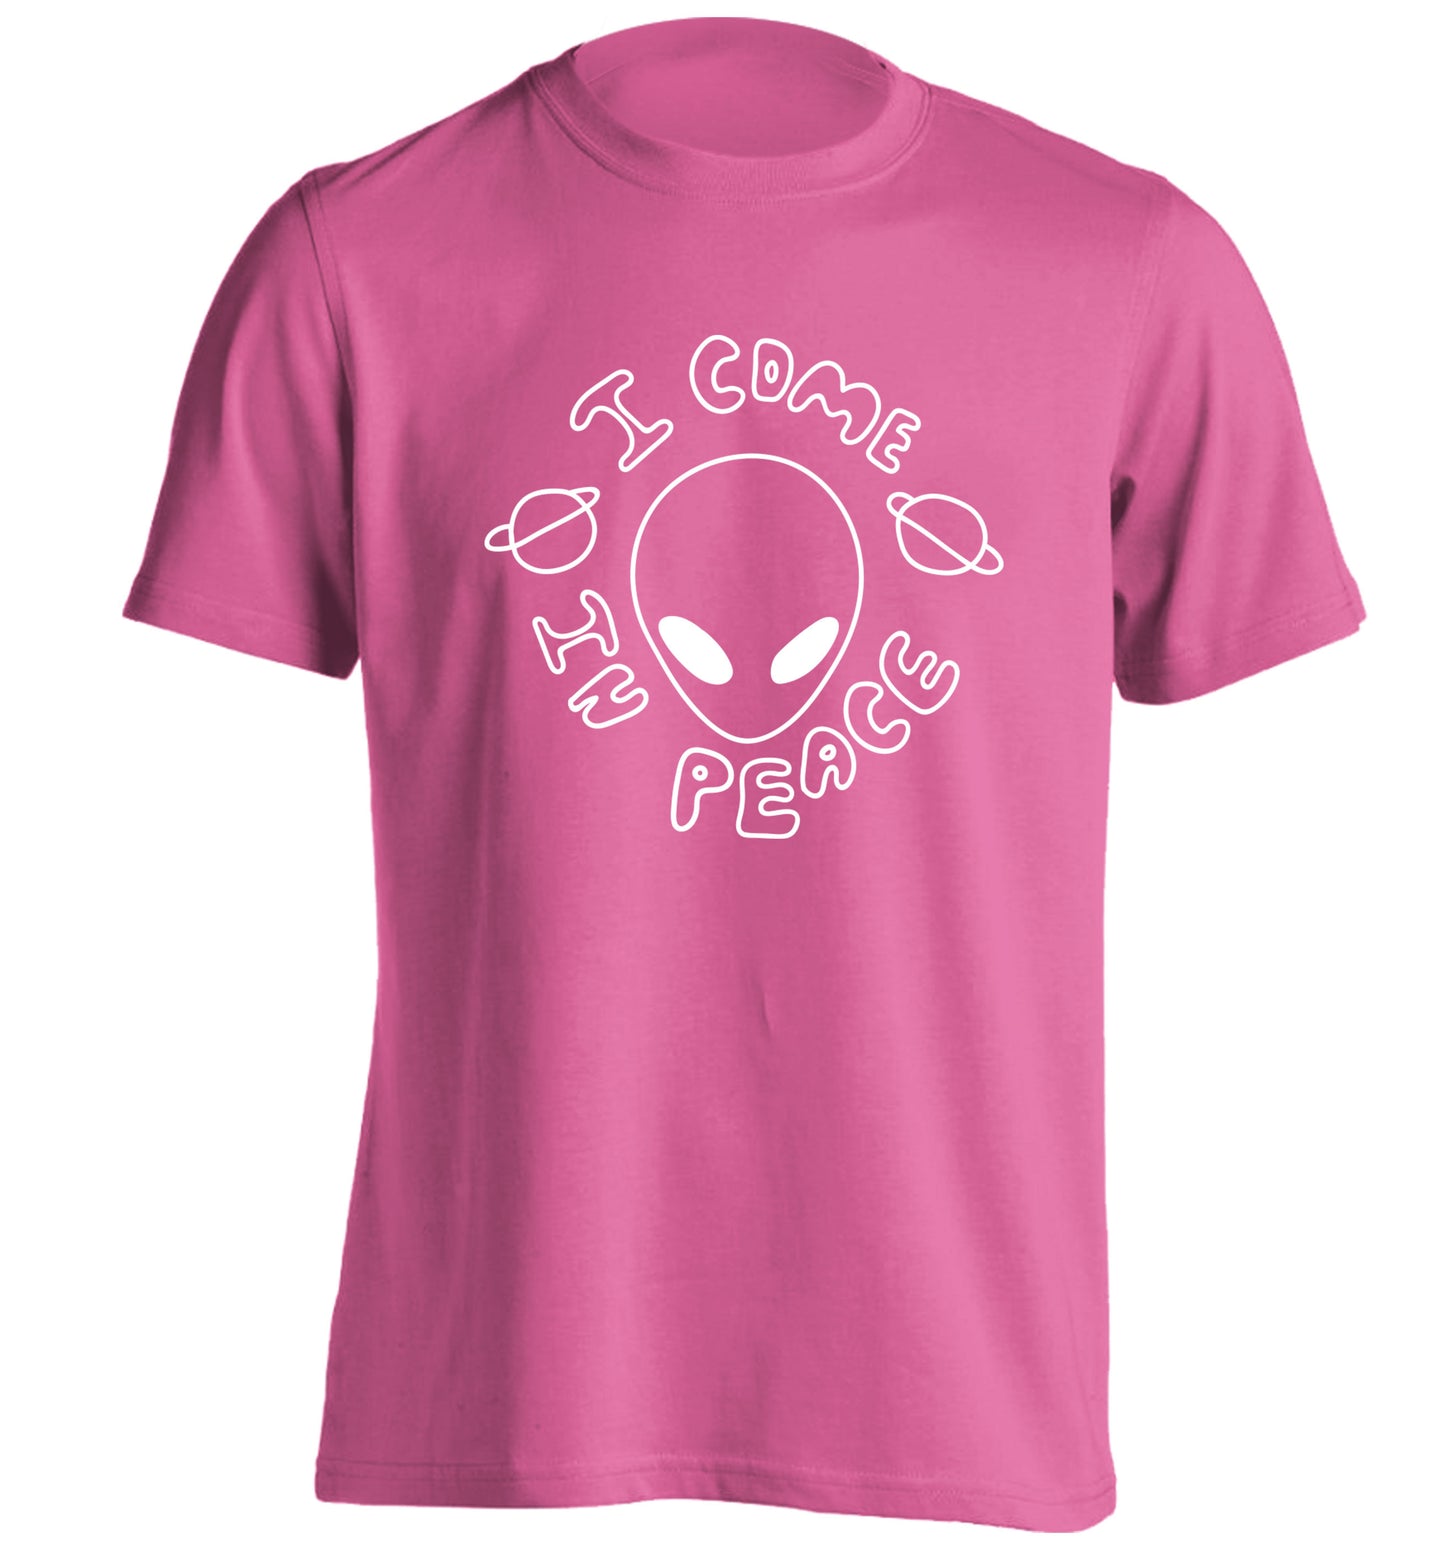 I come in peace adults unisex pink Tshirt 2XL